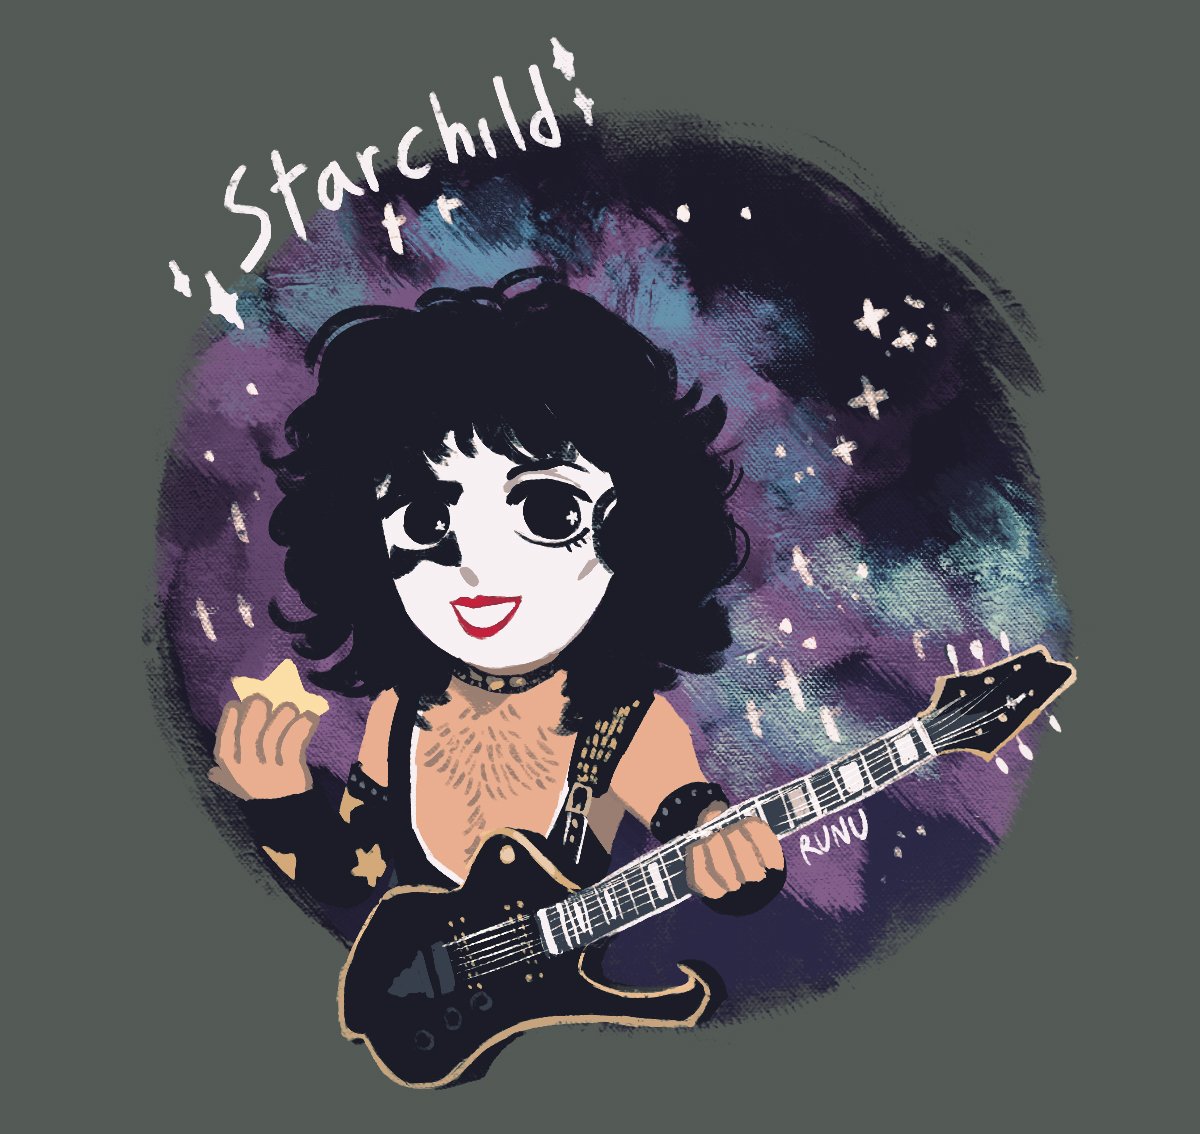 Paul Stanley\s Birthday today (or yesterday?damn the time zones)
Happy Birthday Starchild!   Keep shining bright! 